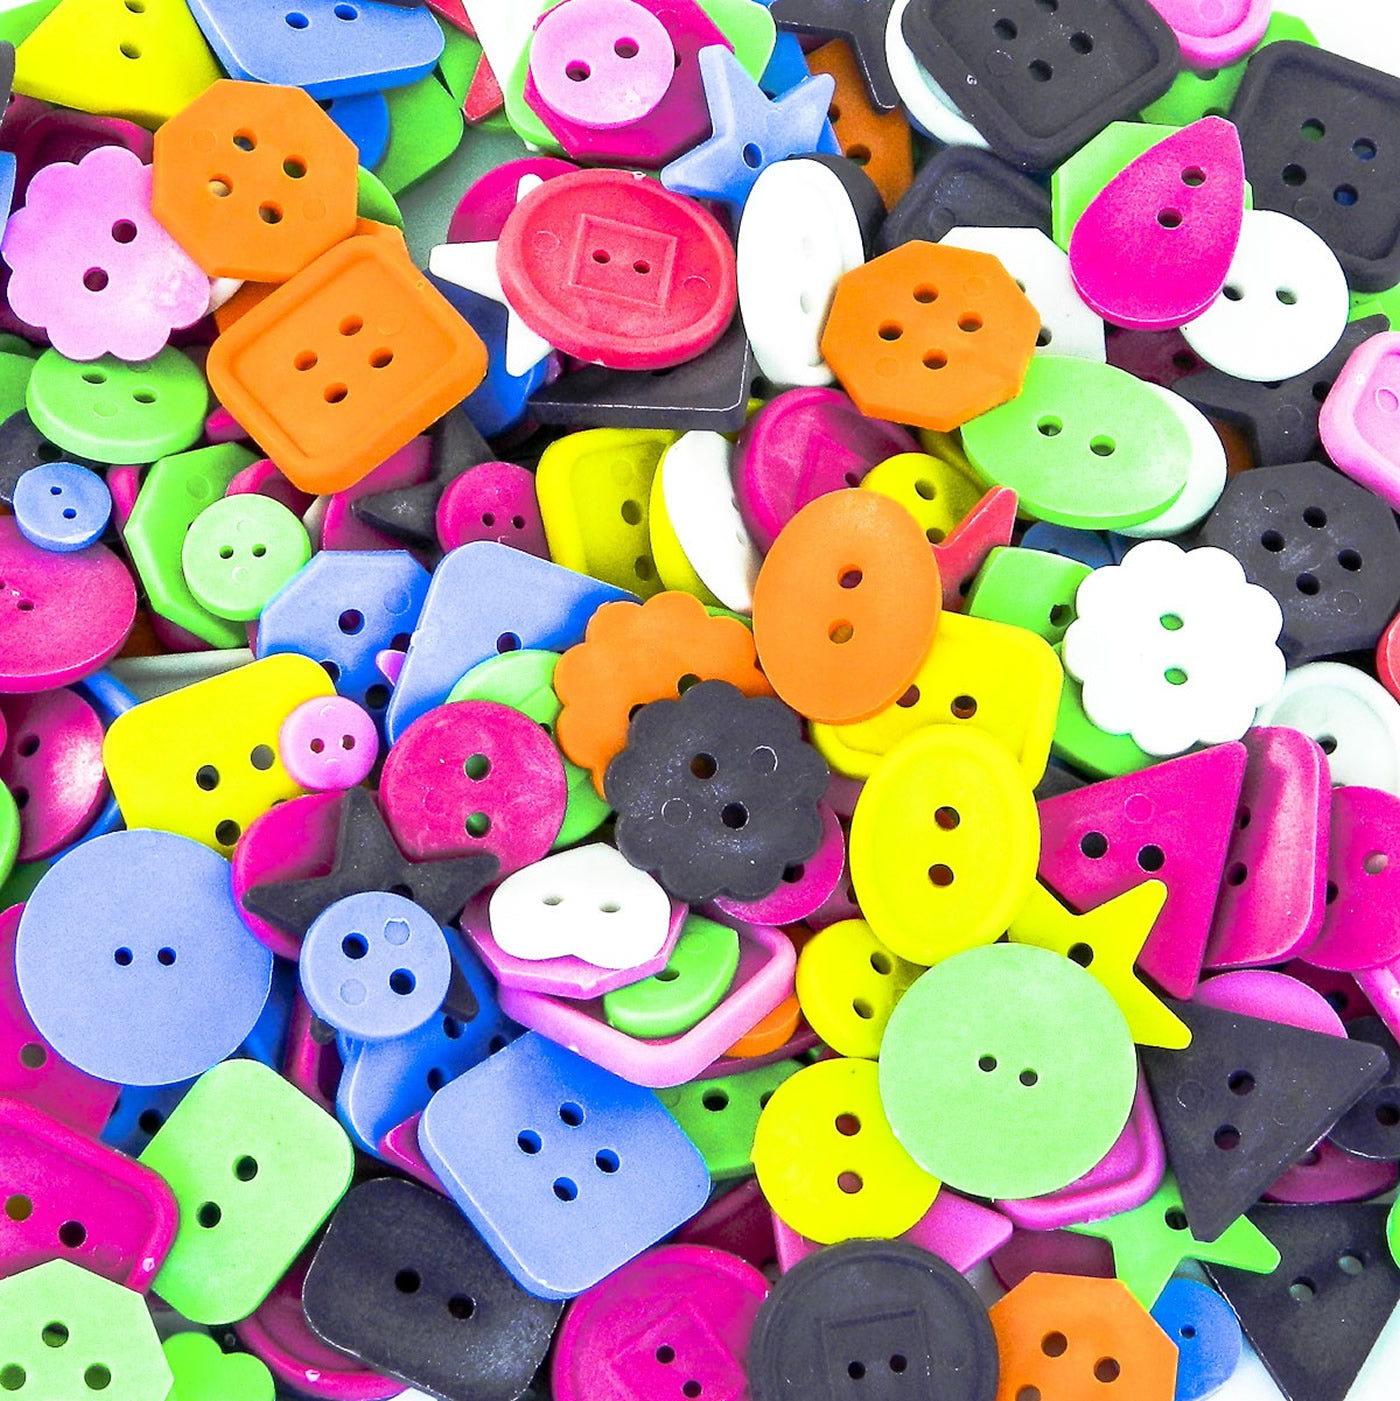 Plastic Play Buttons Assorts Shapes & Colours